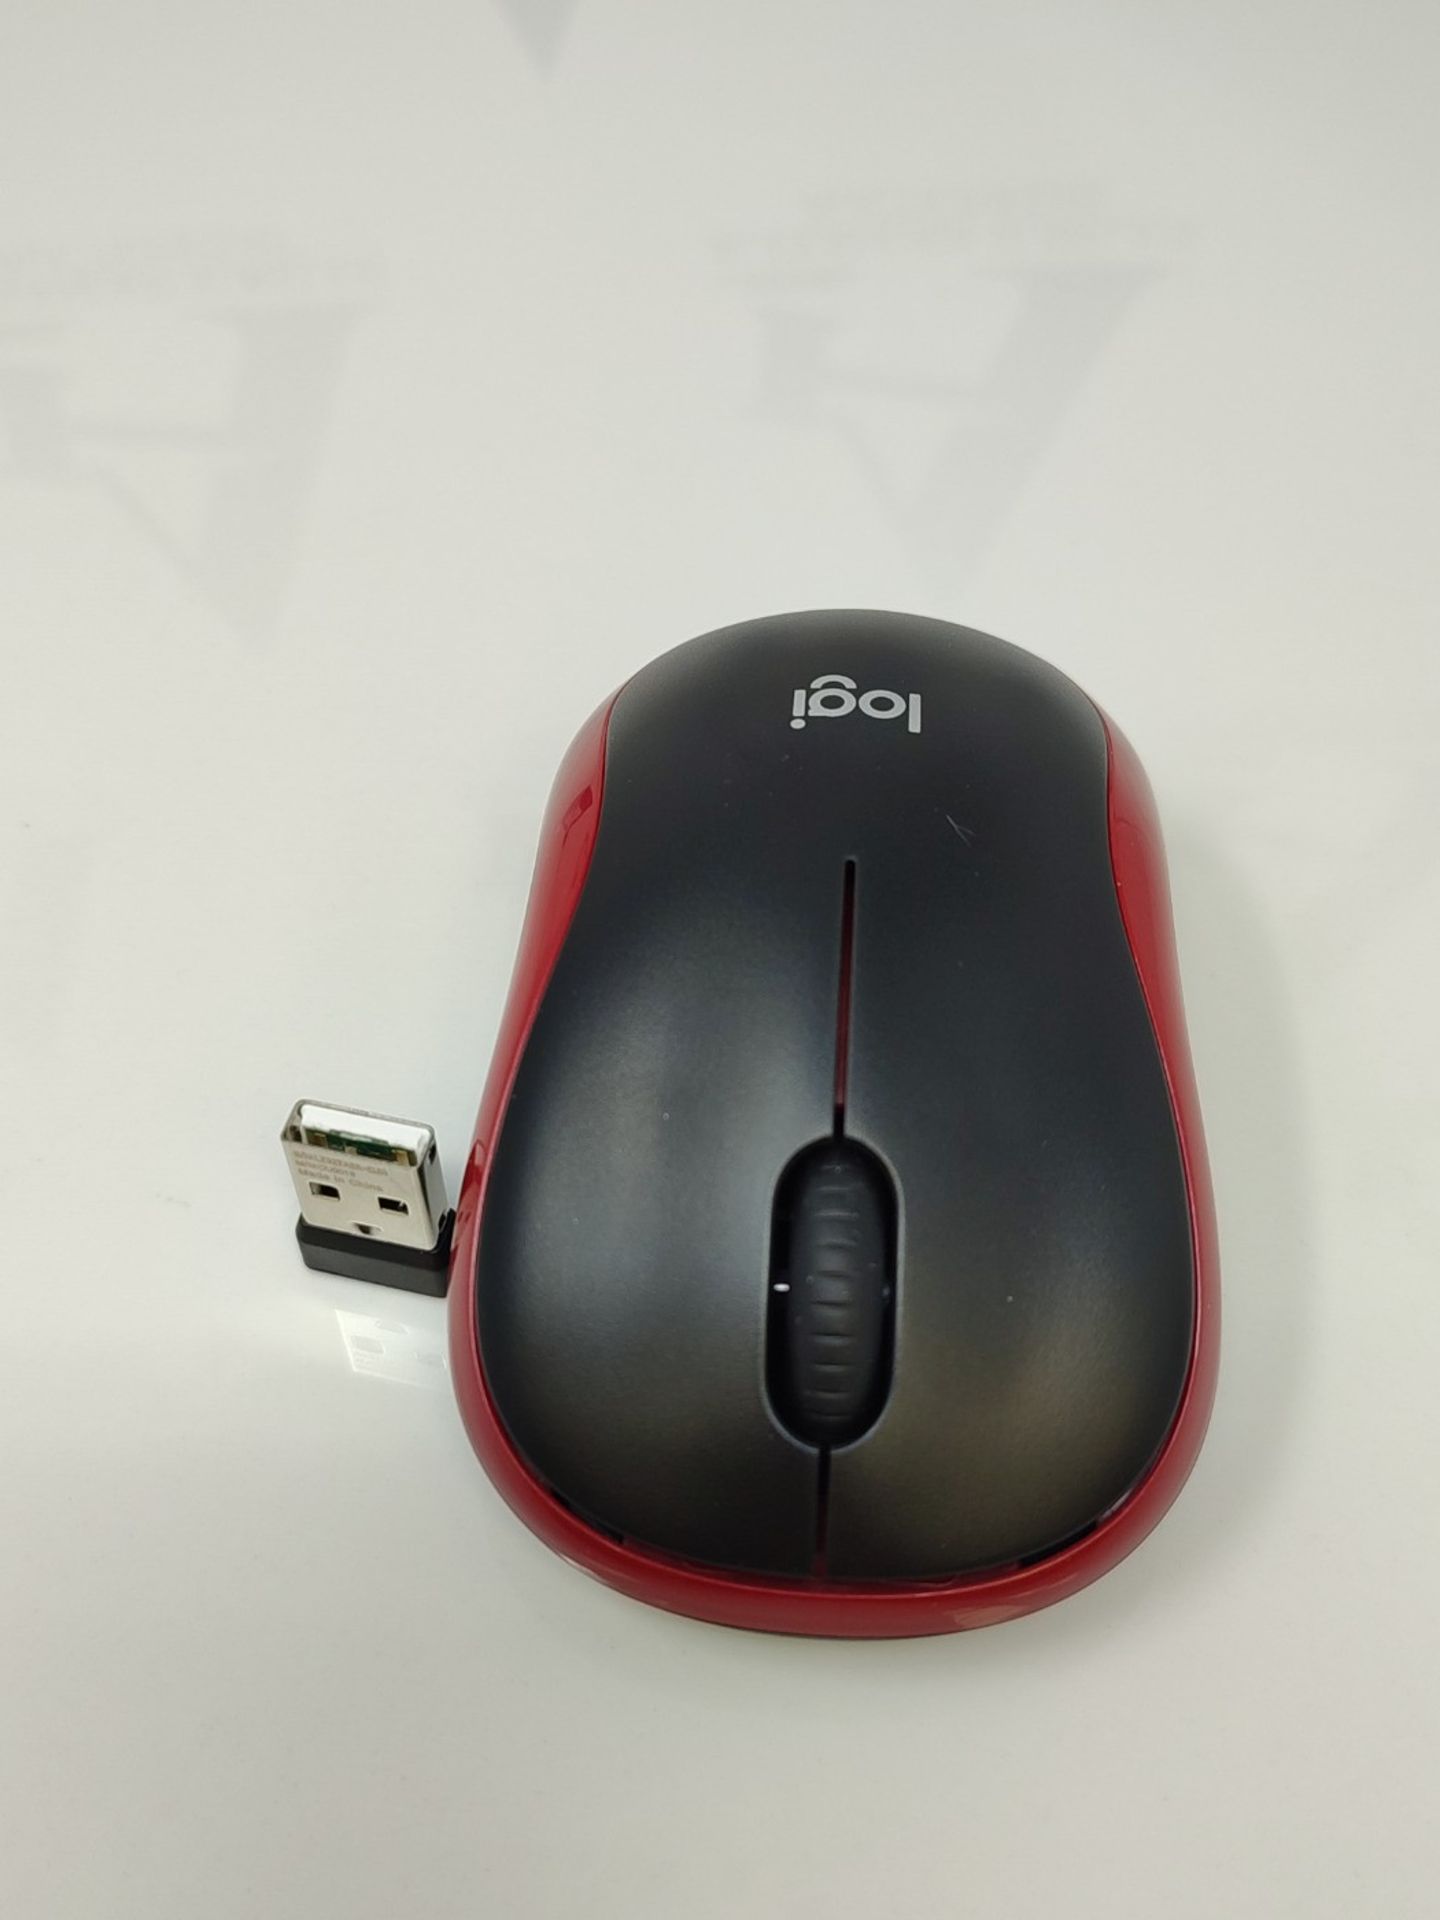 Logitech M185 Wireless Mouse, 2.4 GHz with Mini USB Receiver, 12 Month Battery Life, 1 - Image 3 of 3